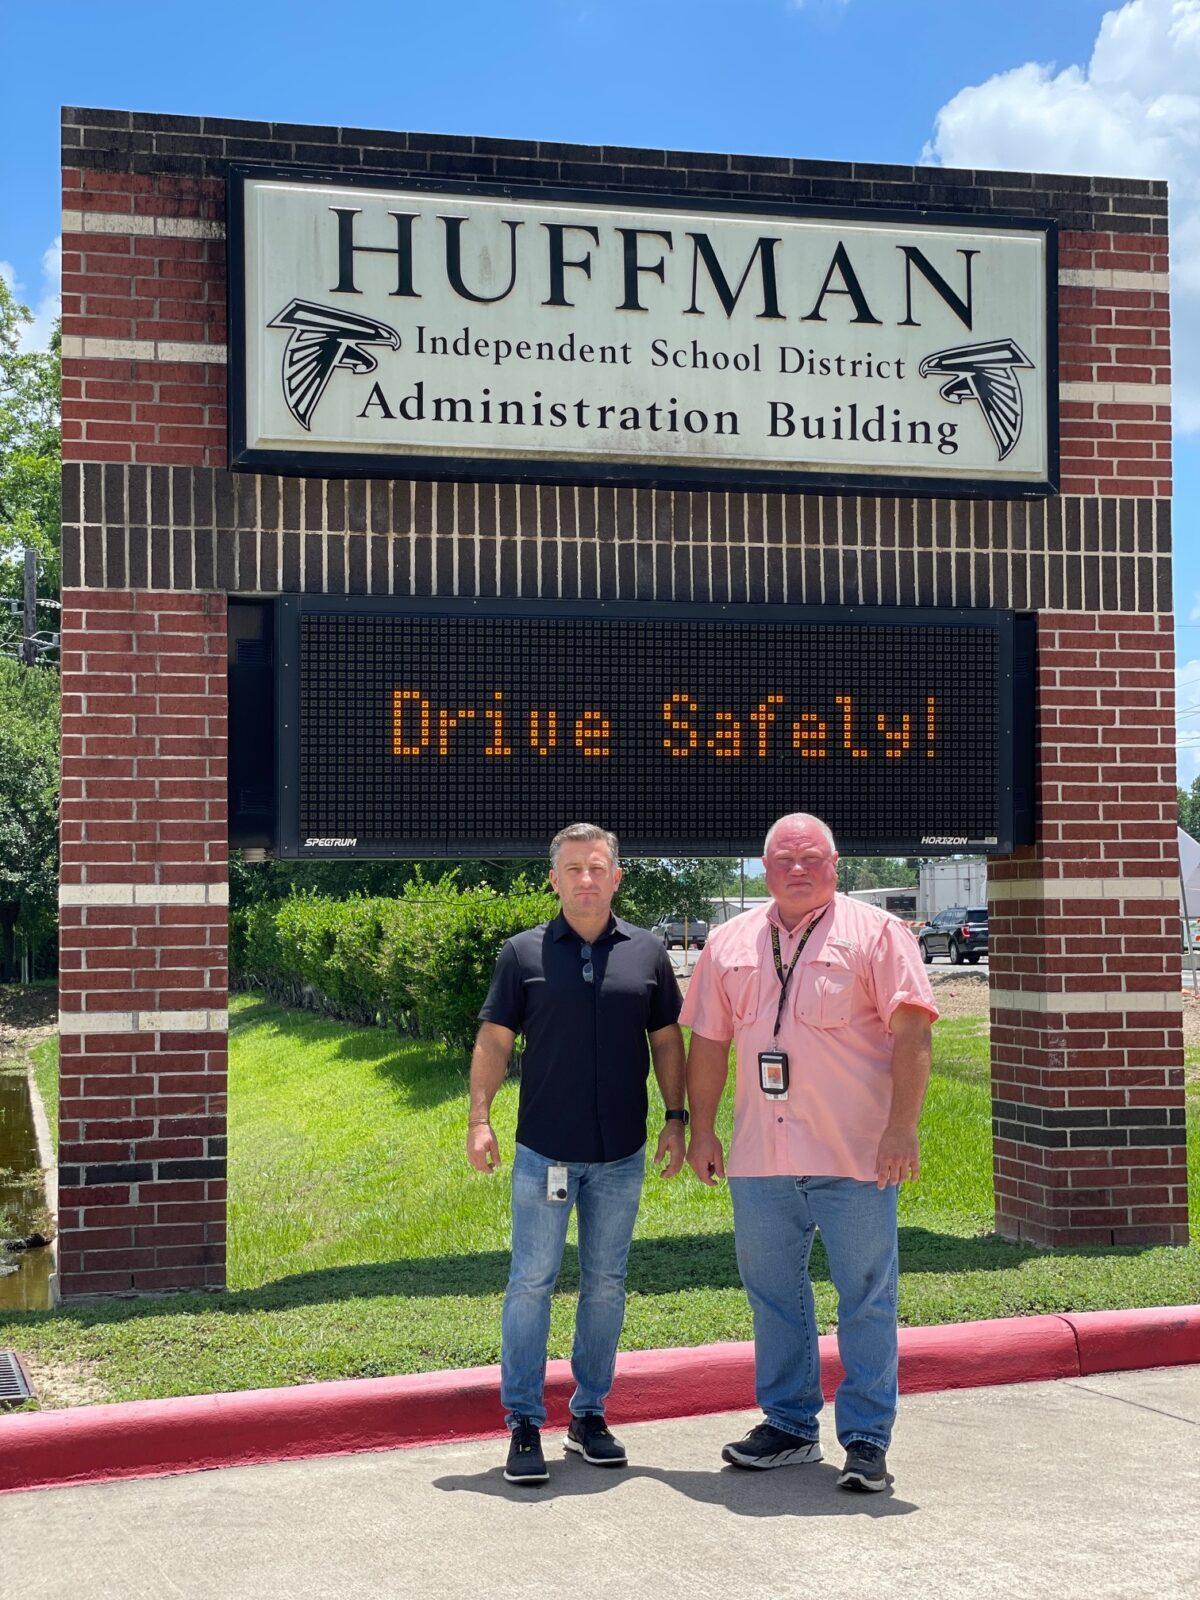 Huffman Independent School District Superintendent of Schools Benny Soileau (L) and Chief of Police David Williams for the Huffman Independent School District, stand before the sign for the Huffman Independent School District Administration Building. (Courtesy of the Huffman Independent School District)